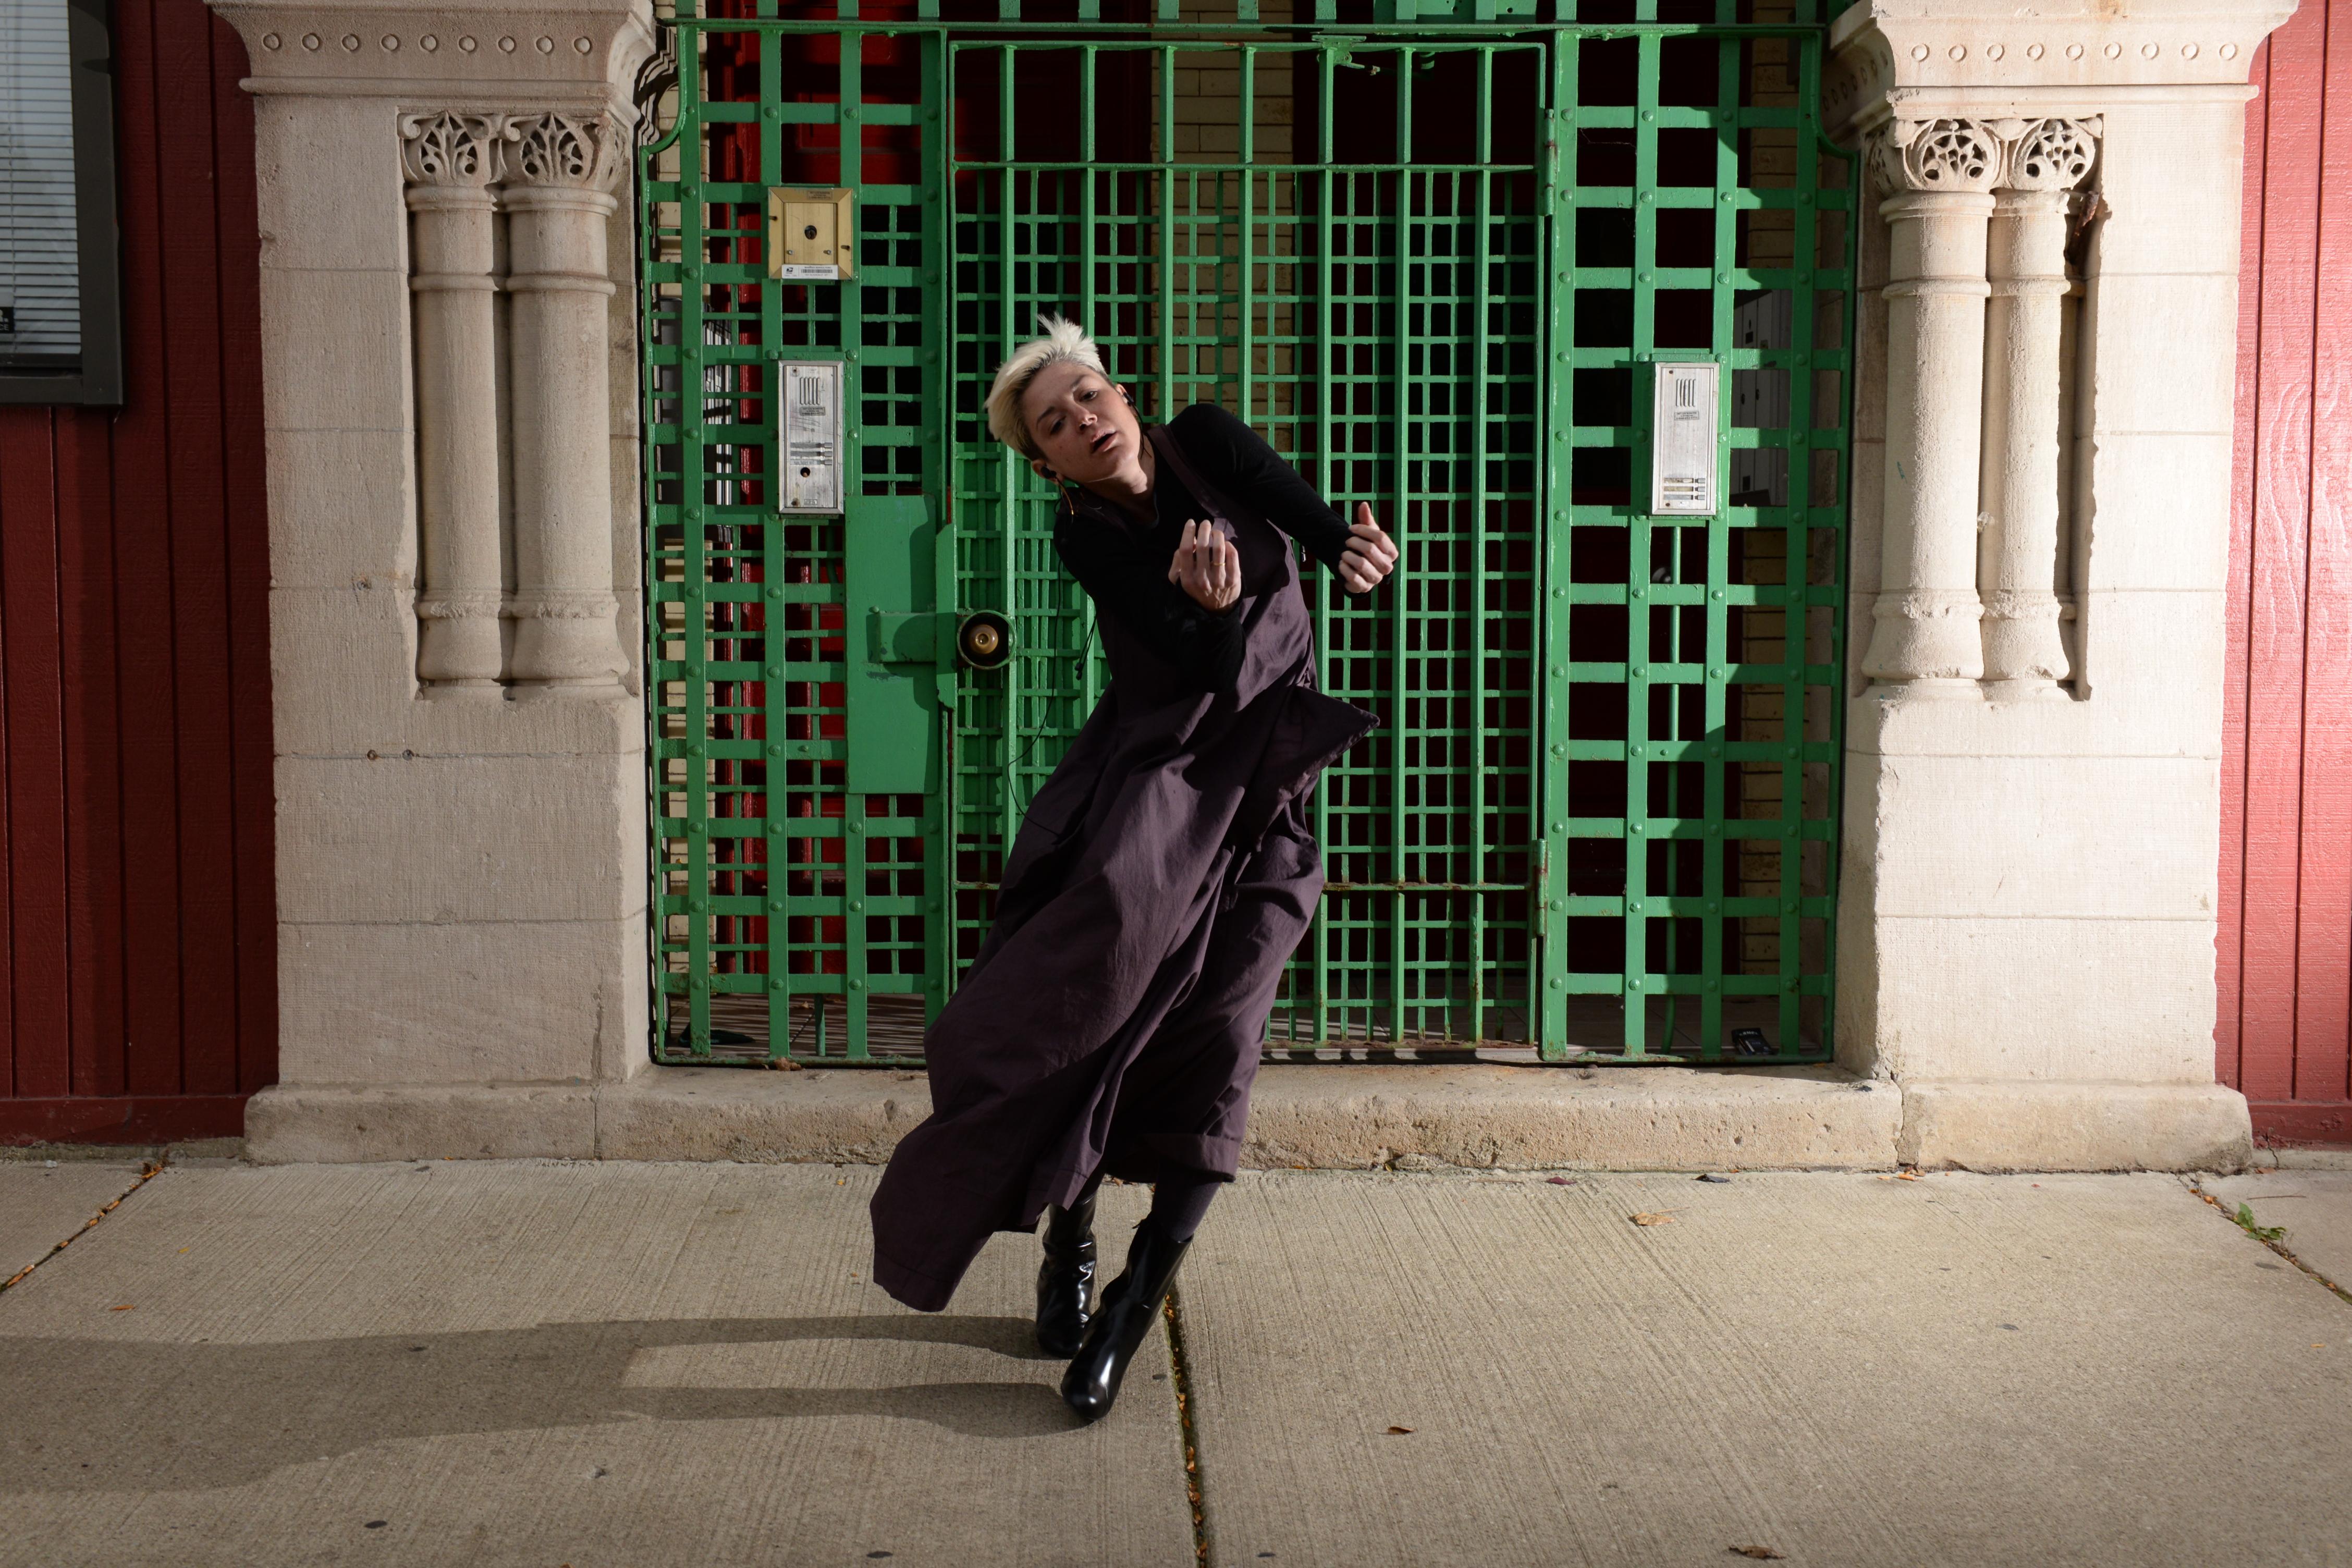 A person wearing a long purple jacket and black boots strikes a dance pose on a sidewalk in front of a stone building with a green gridded gate blocking the entrance.